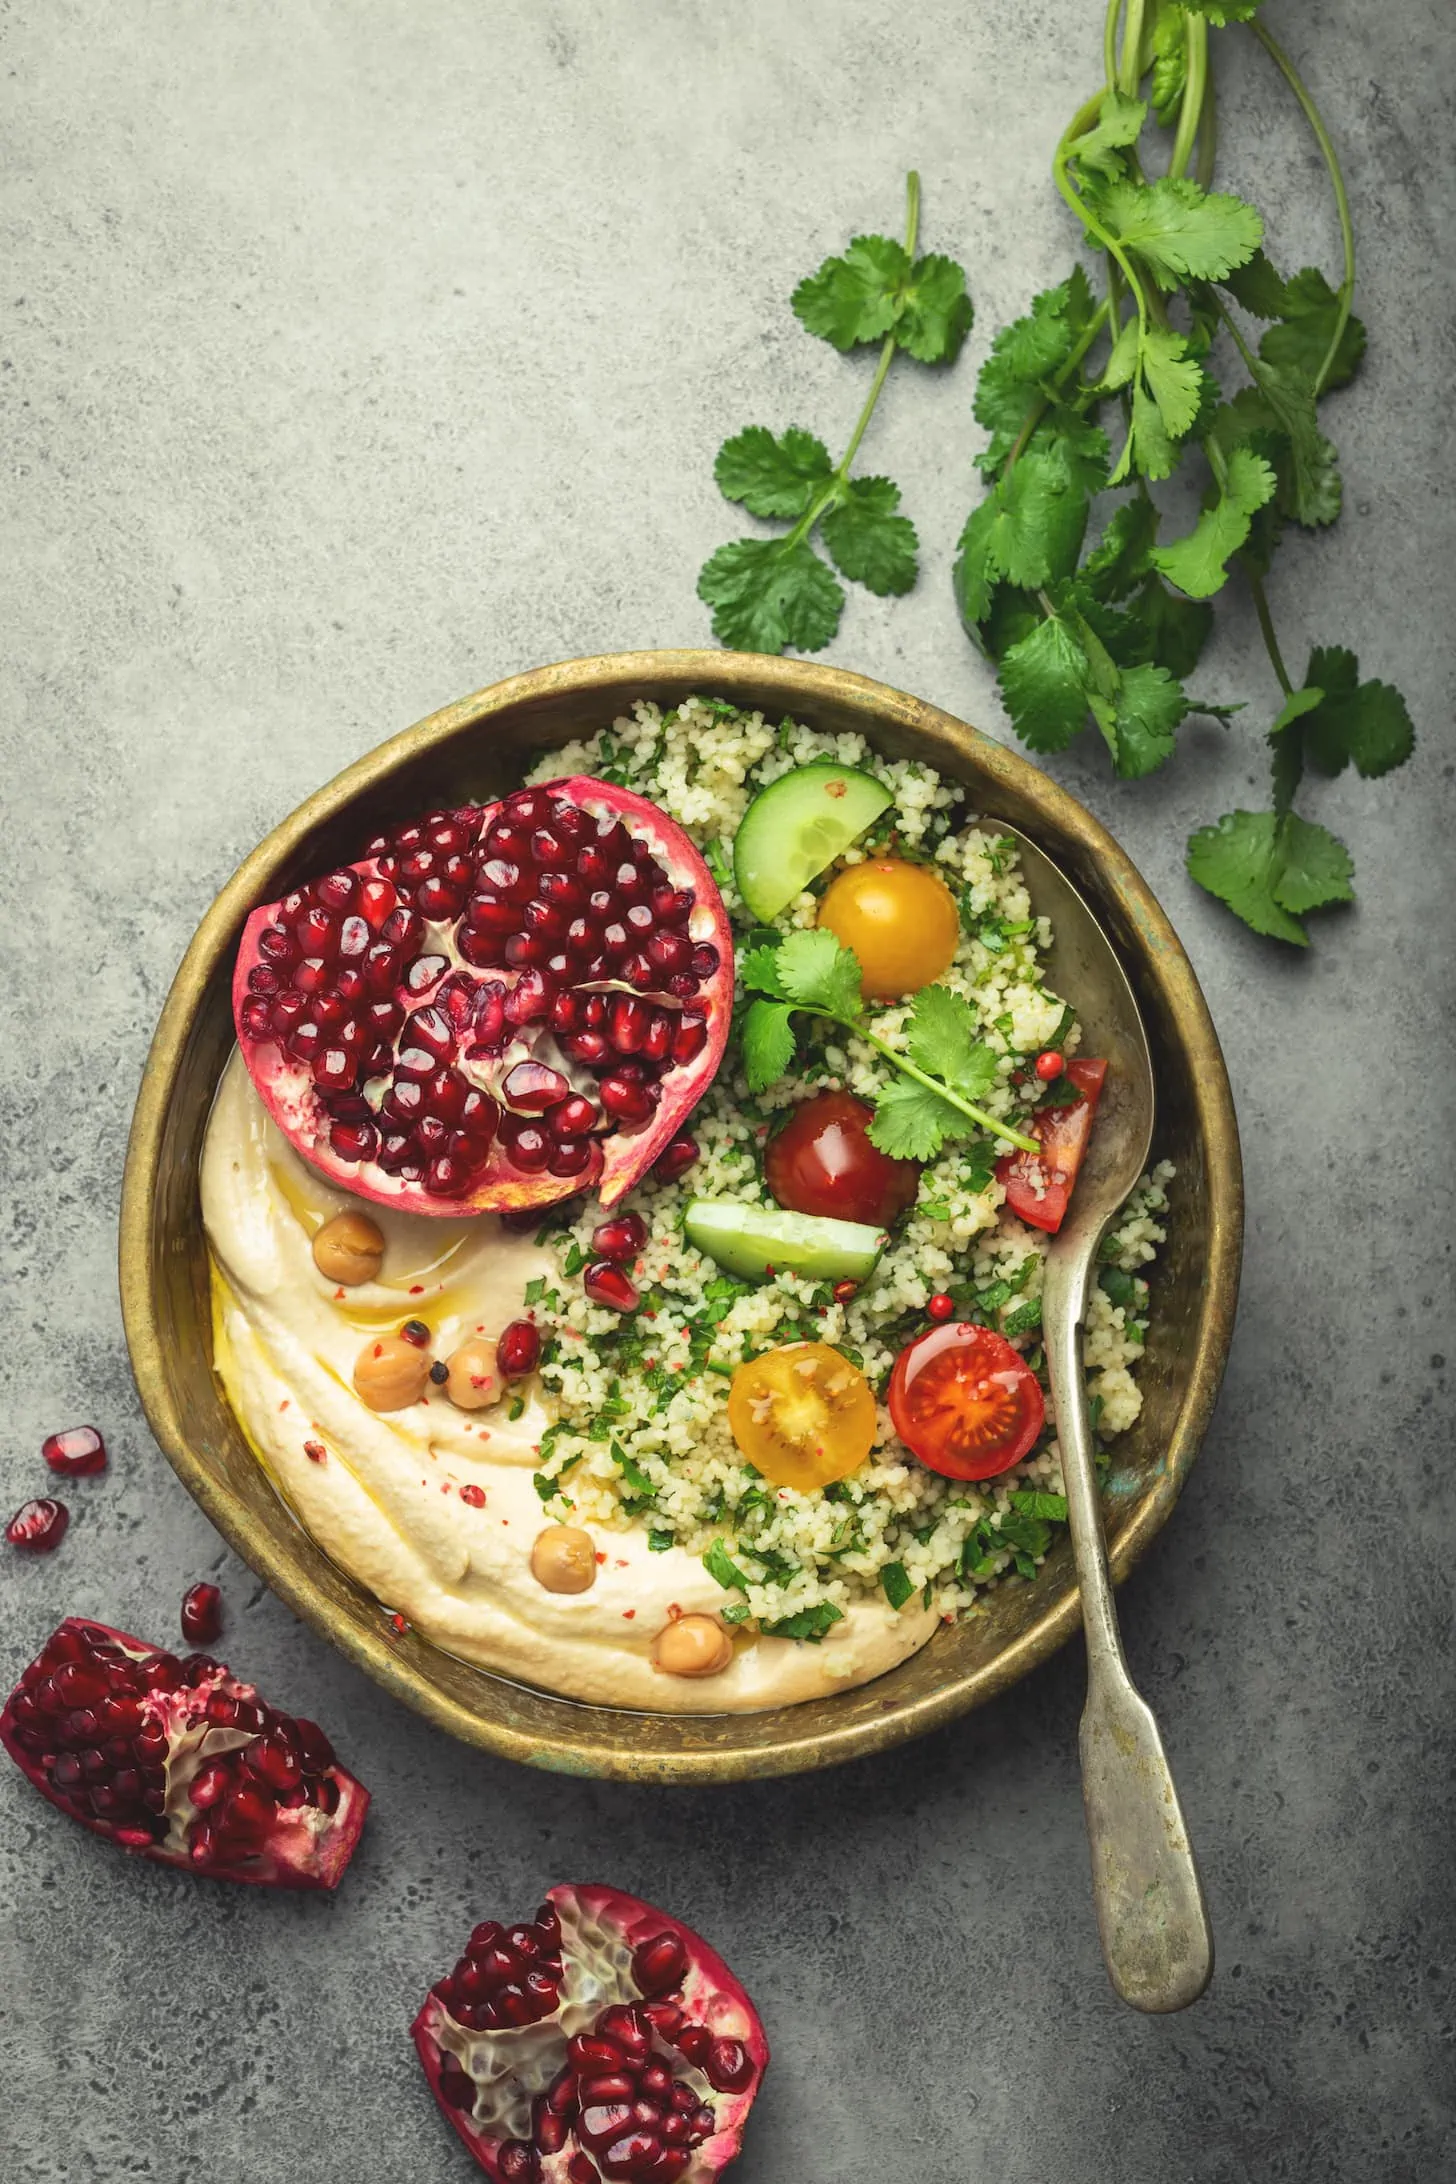 Rustic bowl with couscous salad with vegetables, hummus and fresh cut pomegranate. Middle eastern or Arab style meal with seasonings and fresh cilantro. Healthy Mediterranean dinner, toned image